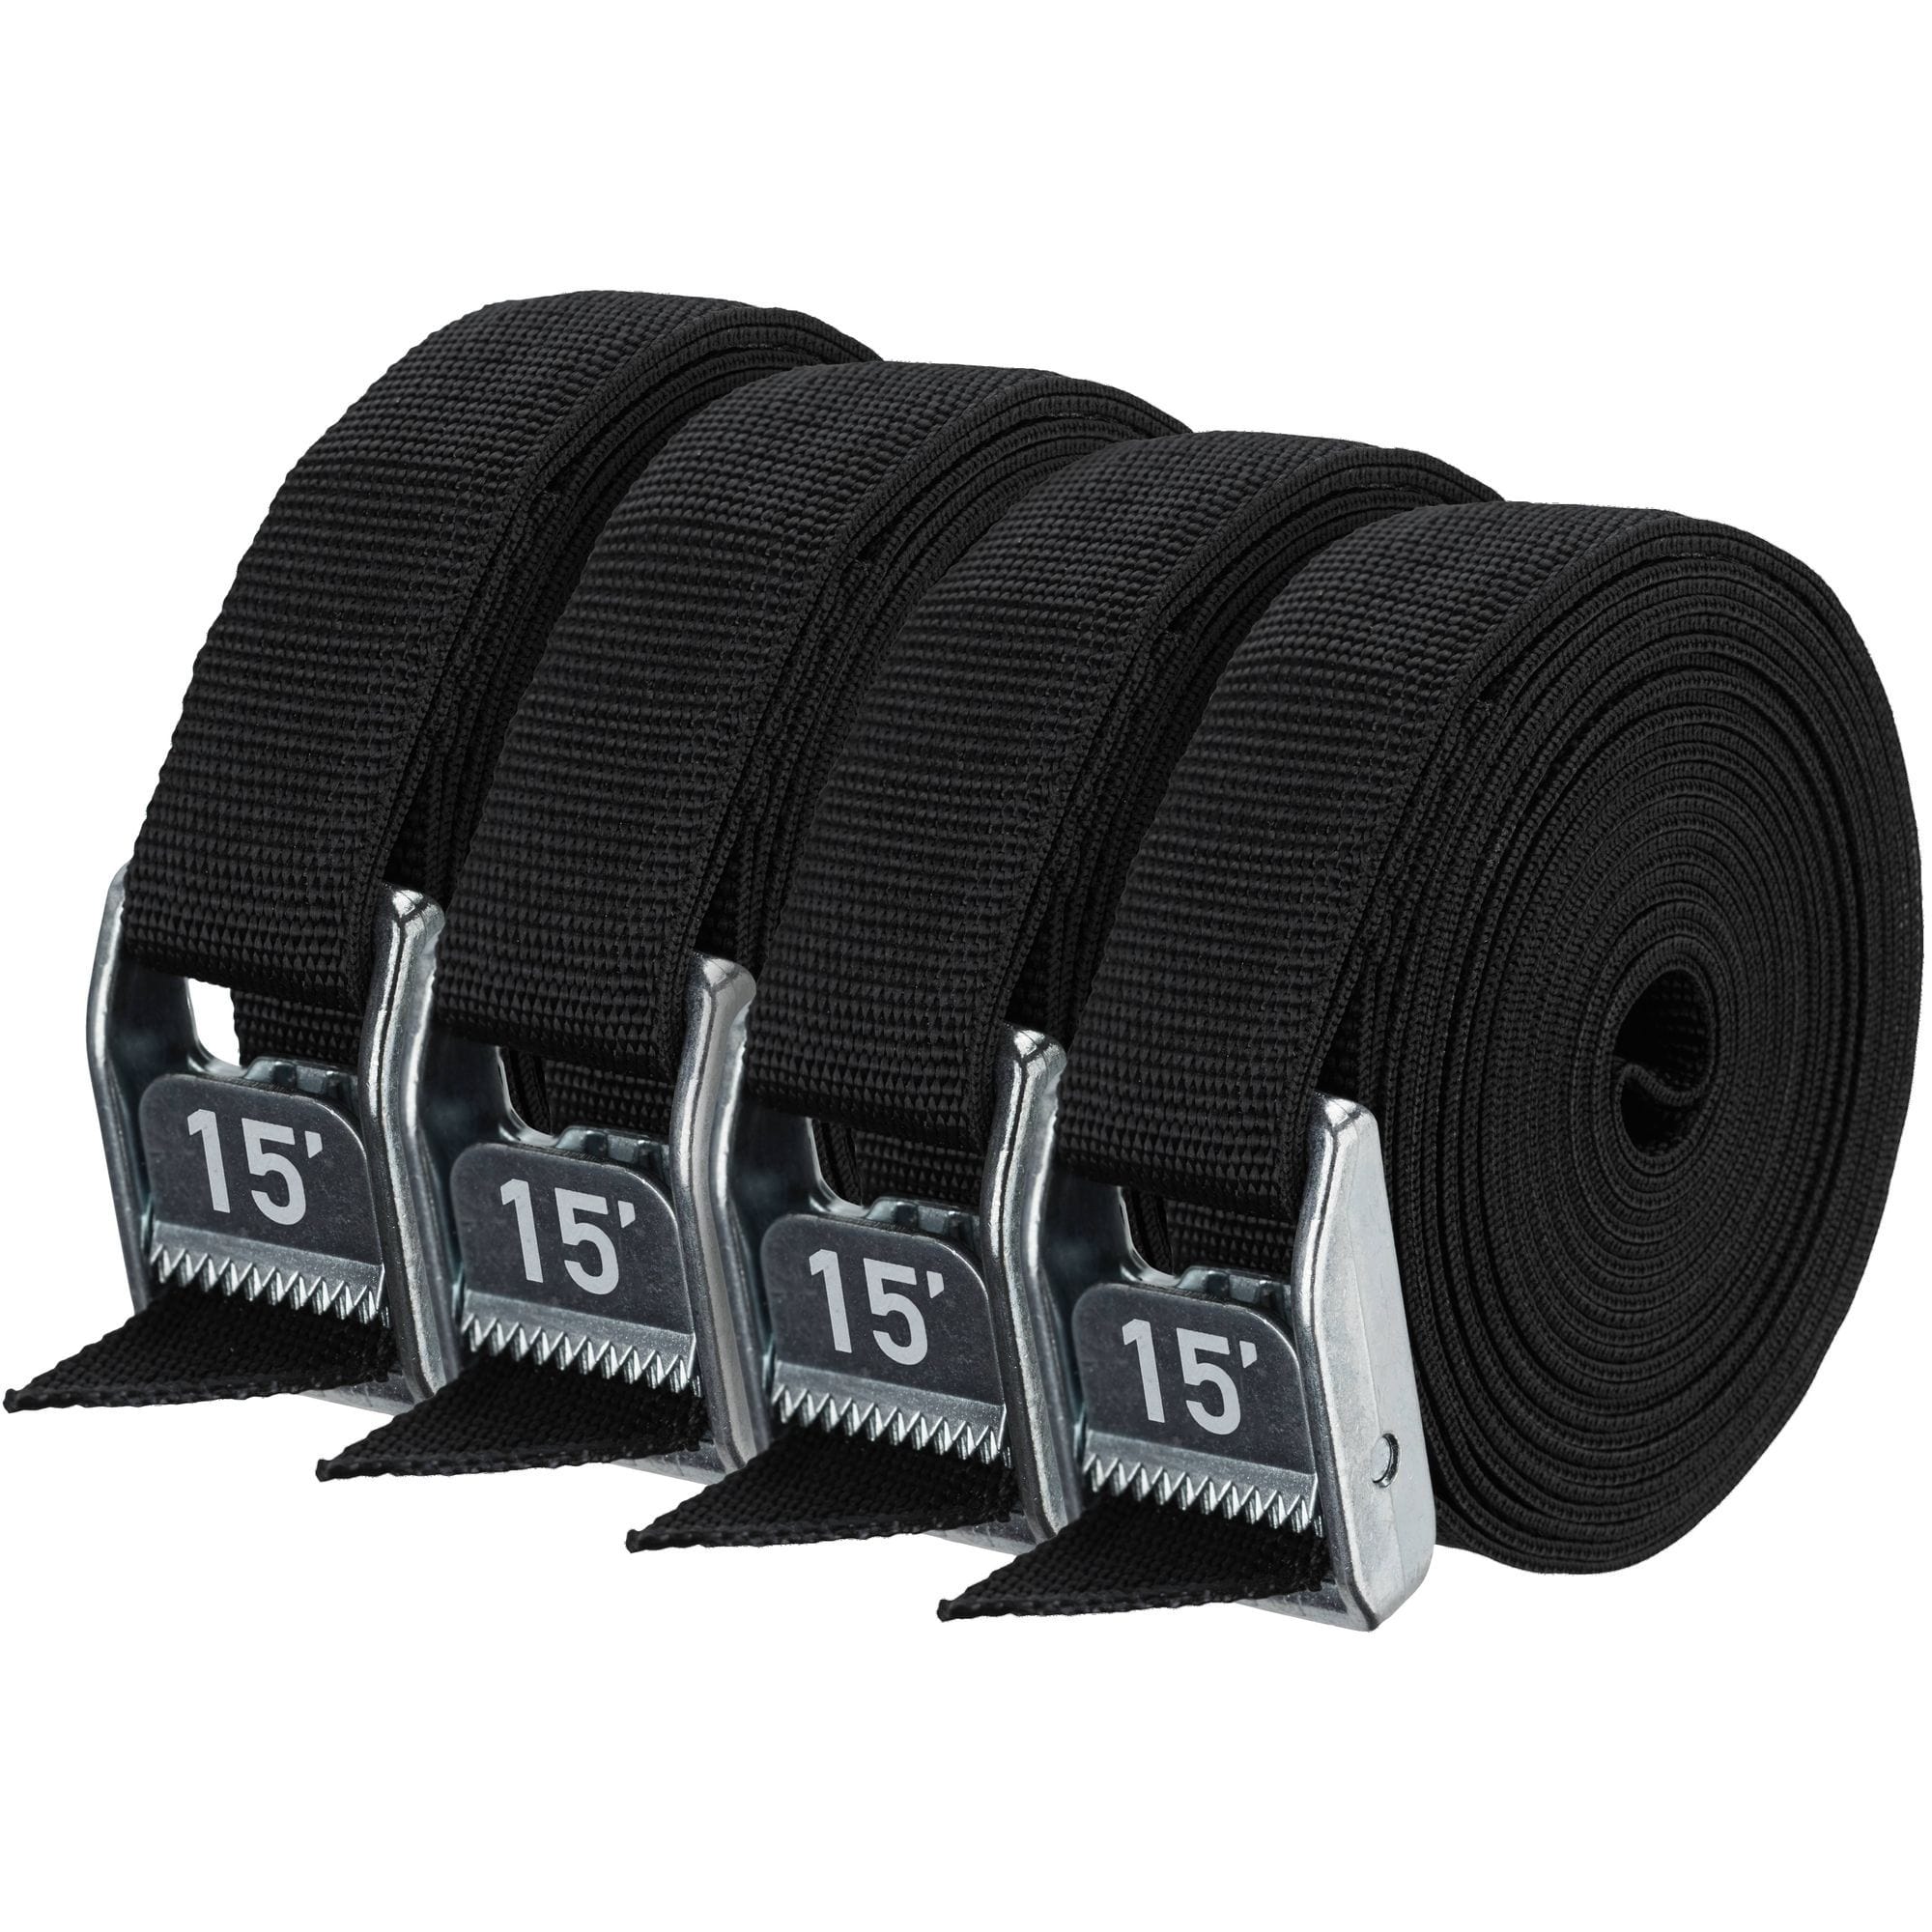 NRS 1 Heavy Duty Tie Down Strap 4 Pack - 15